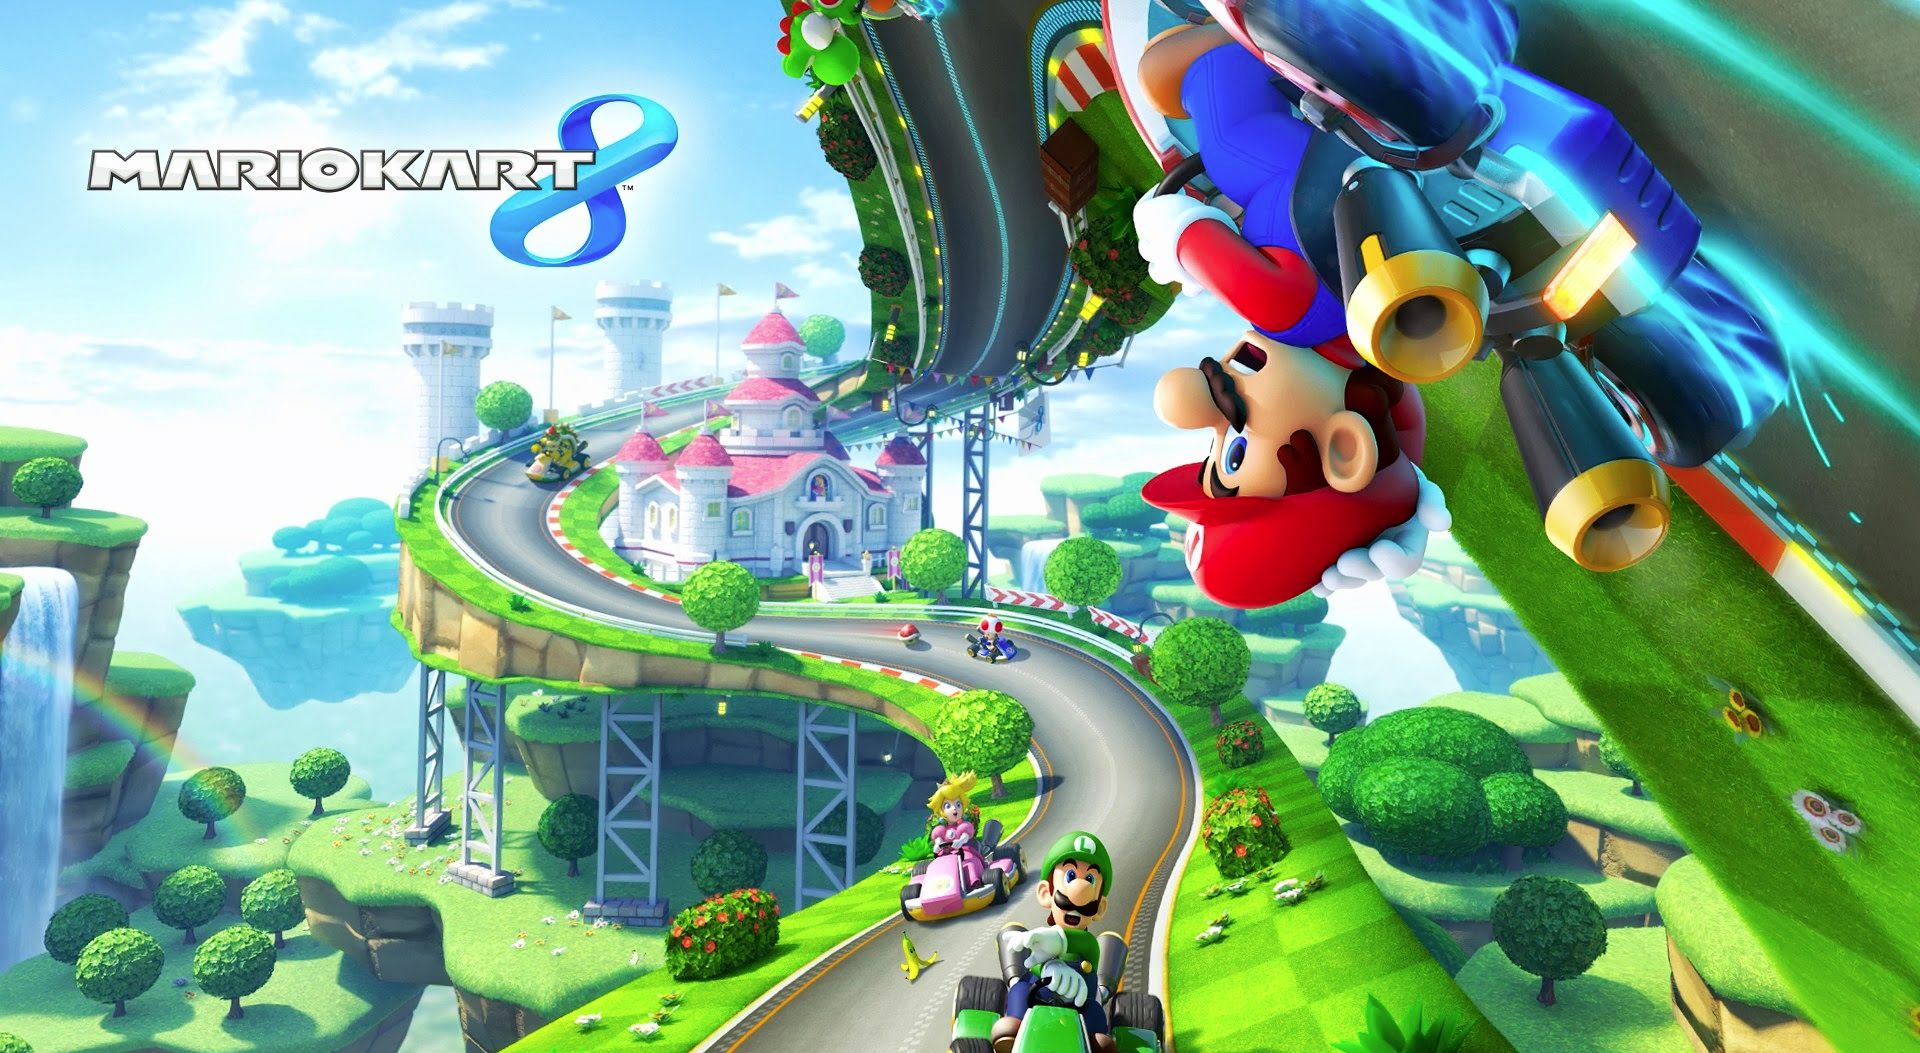 Mario Kart 8 Release Date In May Watch New Game Play And Info Trailer Here Ibtimes 5418